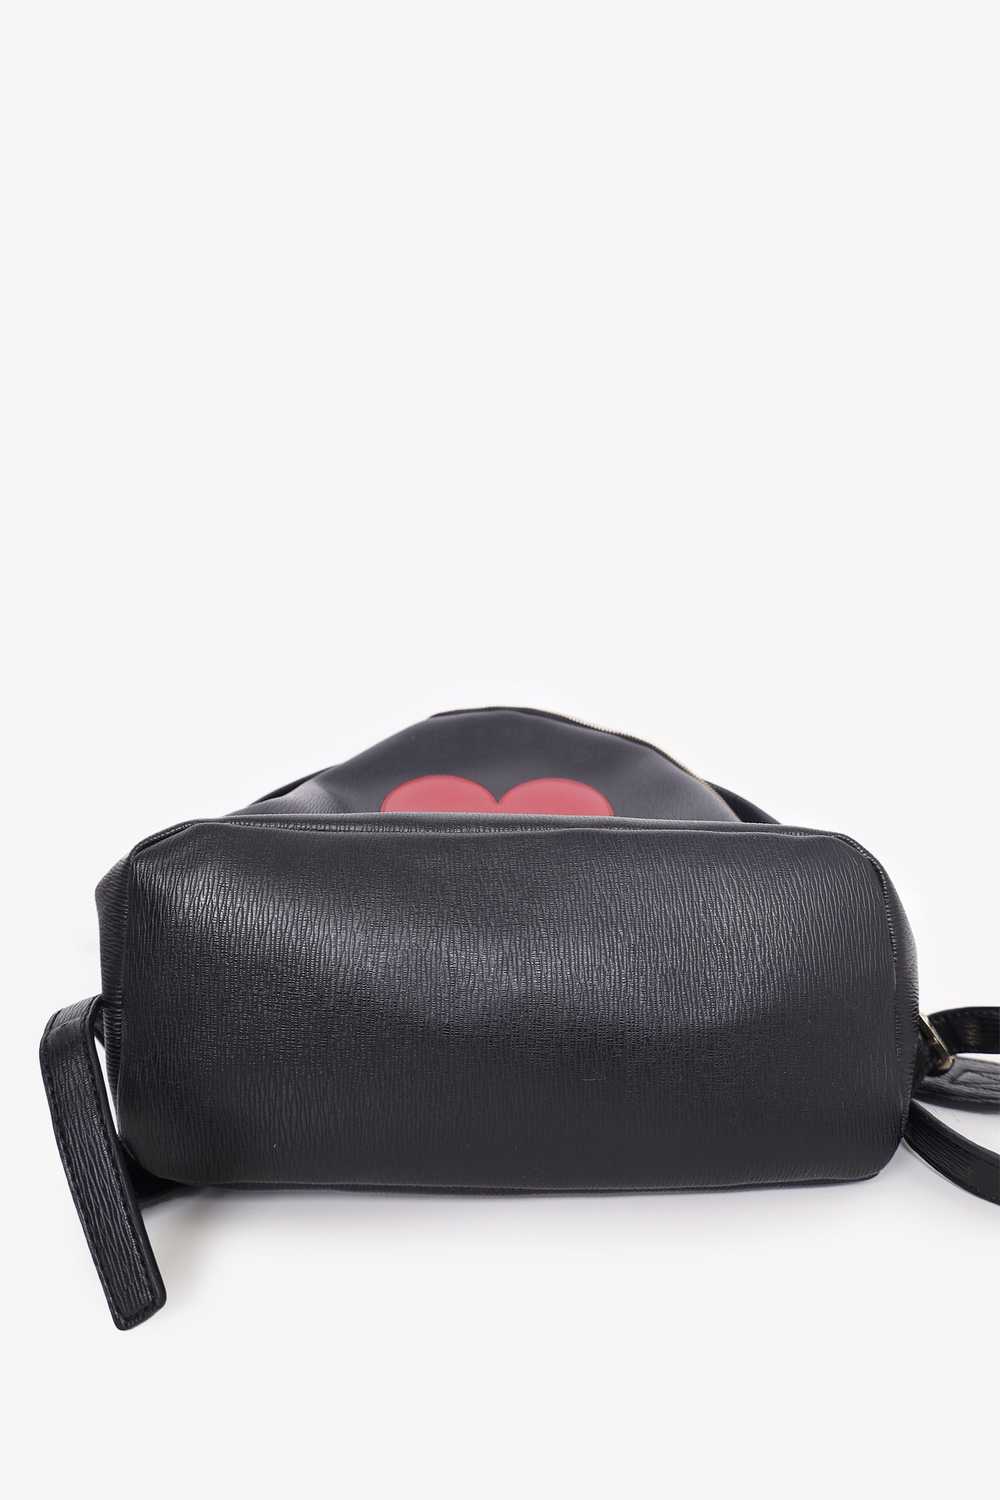 Love Moschino Black Leather Red Heart Backpack - image 6